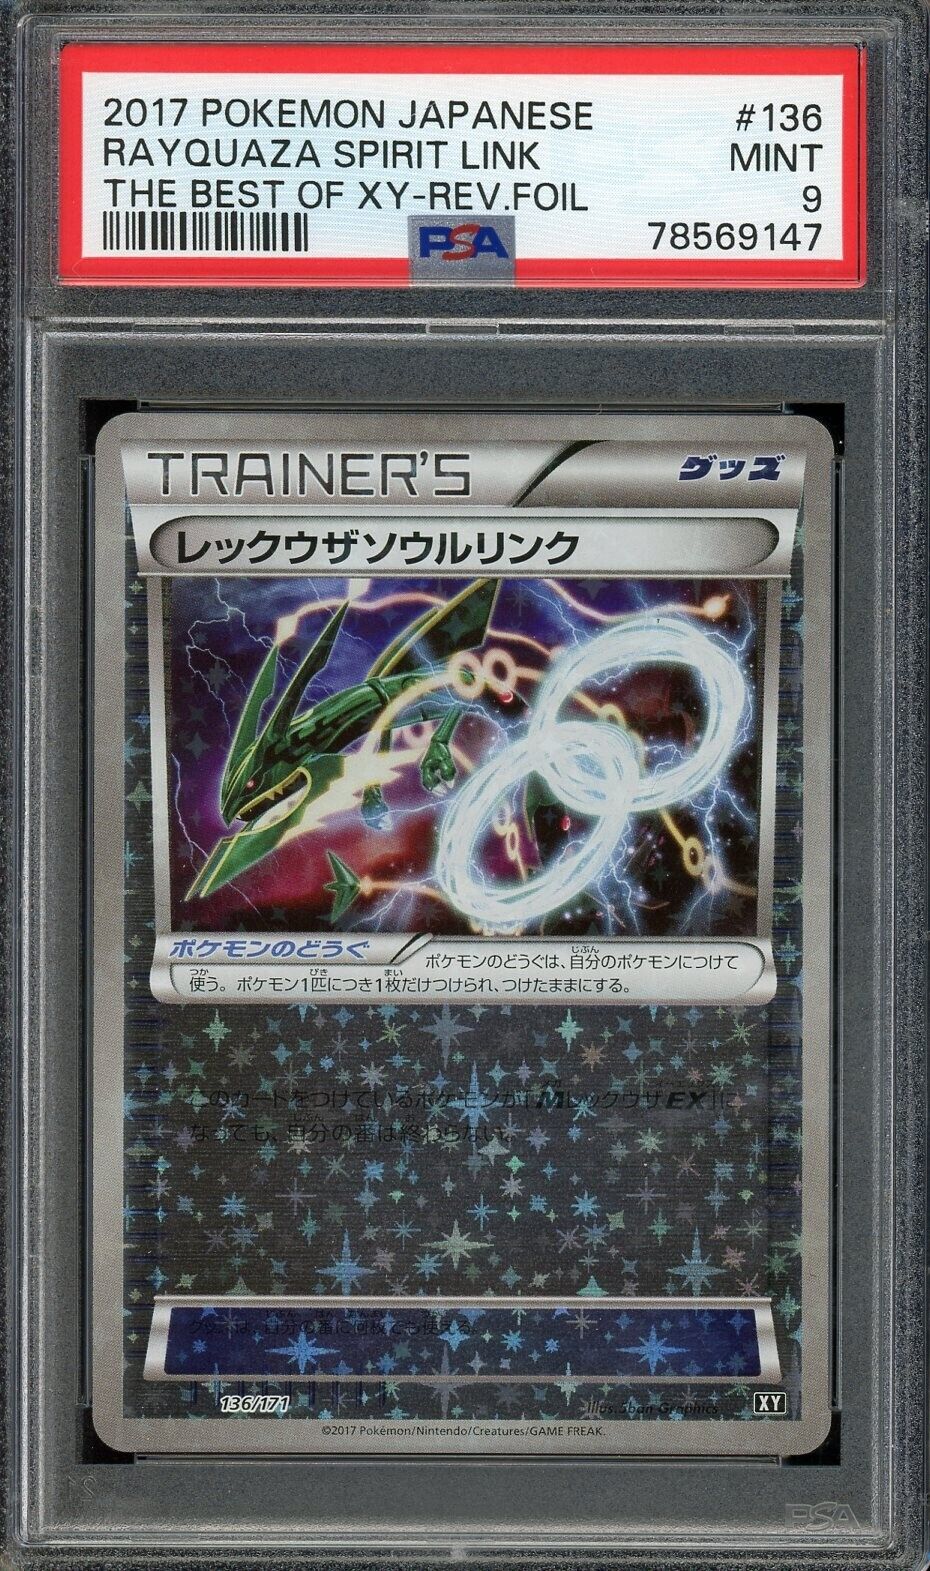 2017 PSA 9 Pokemon The Best Of XY Rayquaza Link 136/171 Reverse Foil Japanese